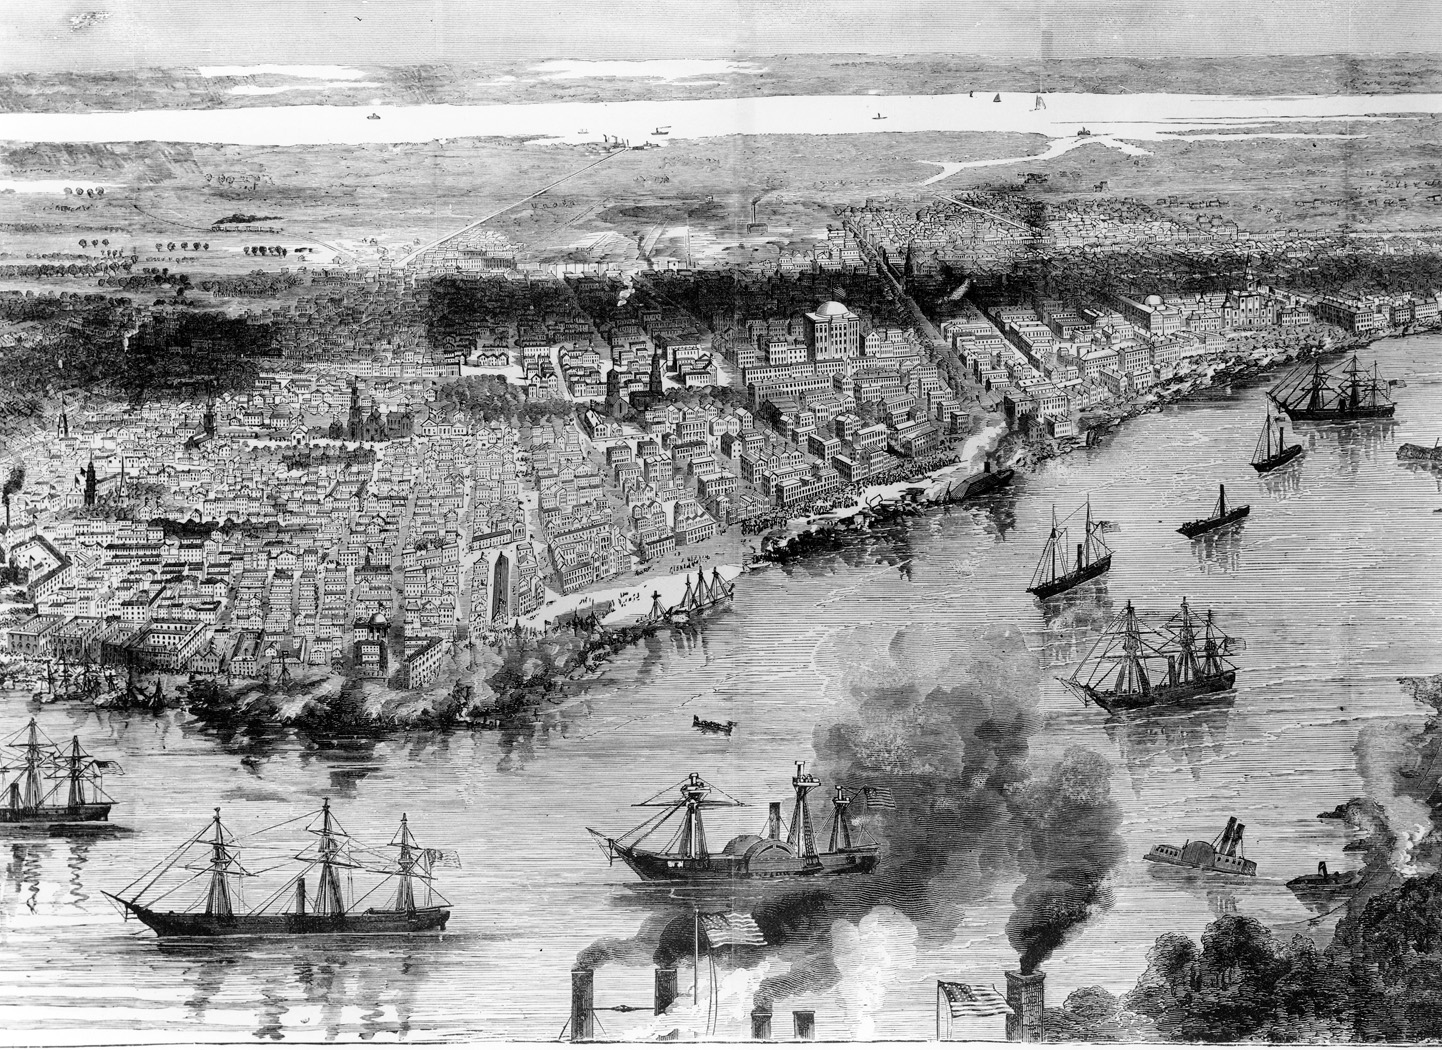 The Union Fleet is shown anchored at New Orleans the day after the battle. If any battle in spring 1862 kept Europe neutral, it was Farragut’s victory at New Orleans.